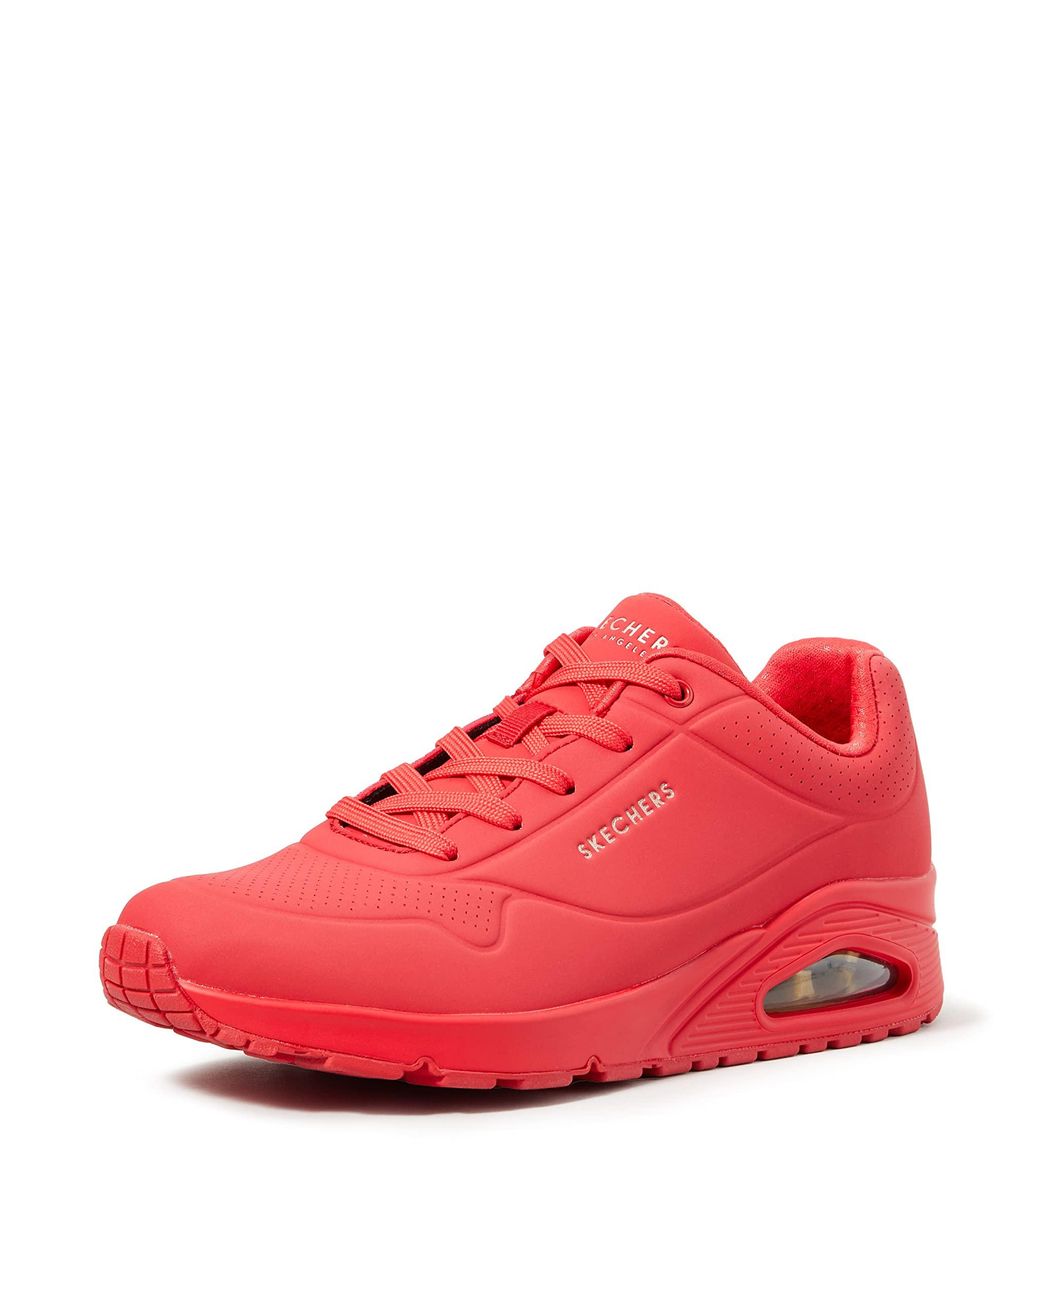 Skechers Uno-stand On Air Sneaker in Red | Lyst